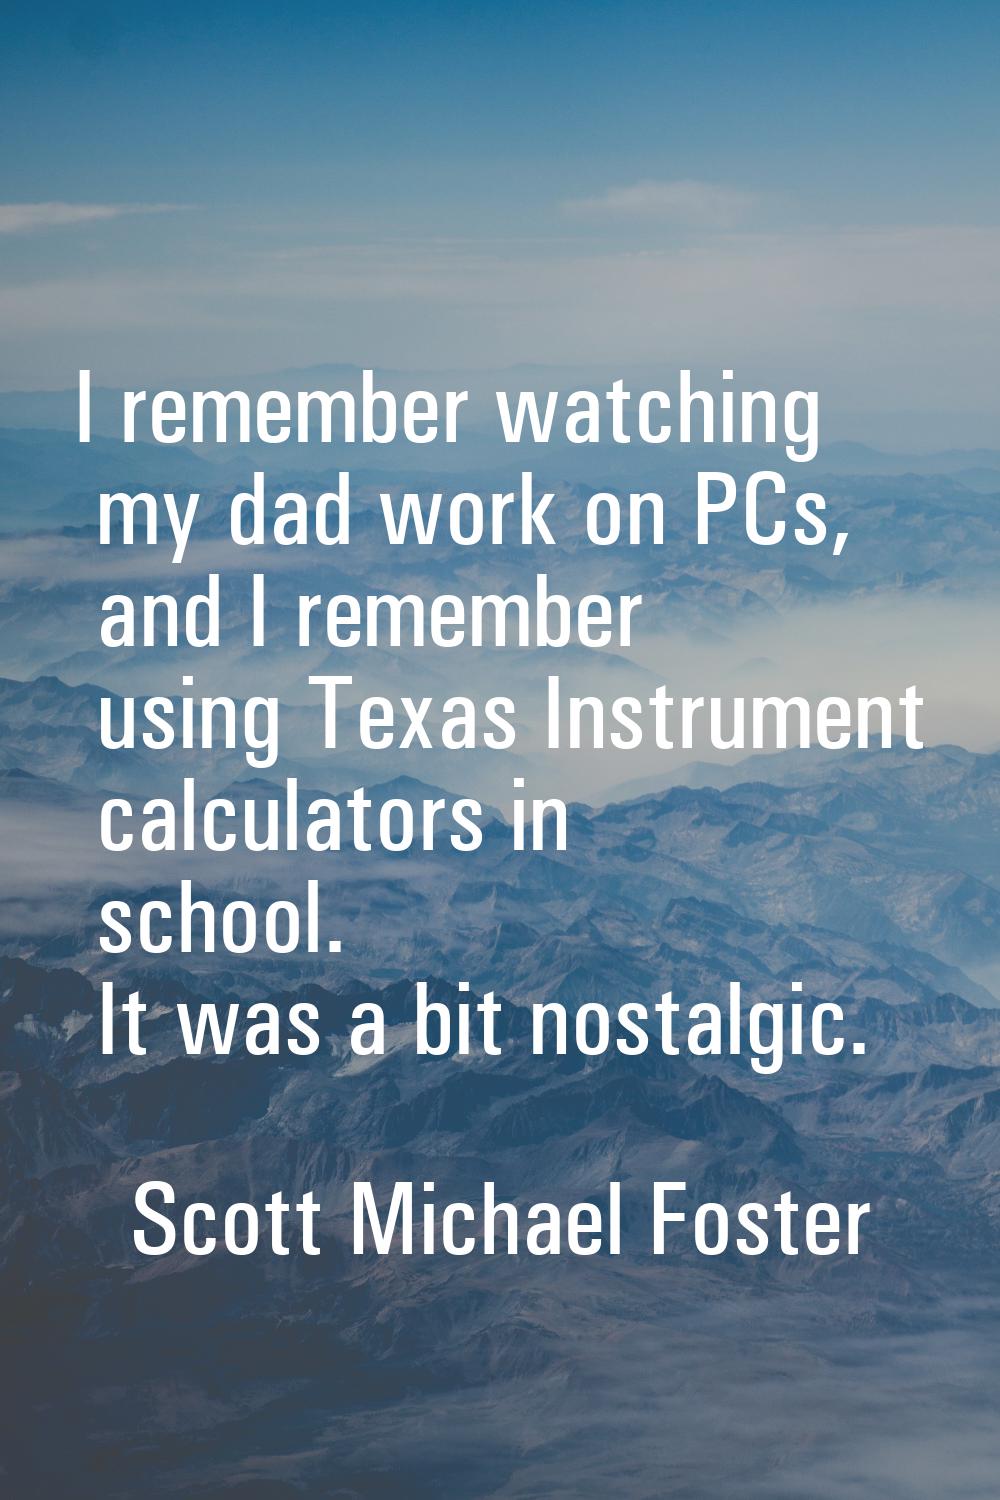 I remember watching my dad work on PCs, and I remember using Texas Instrument calculators in school